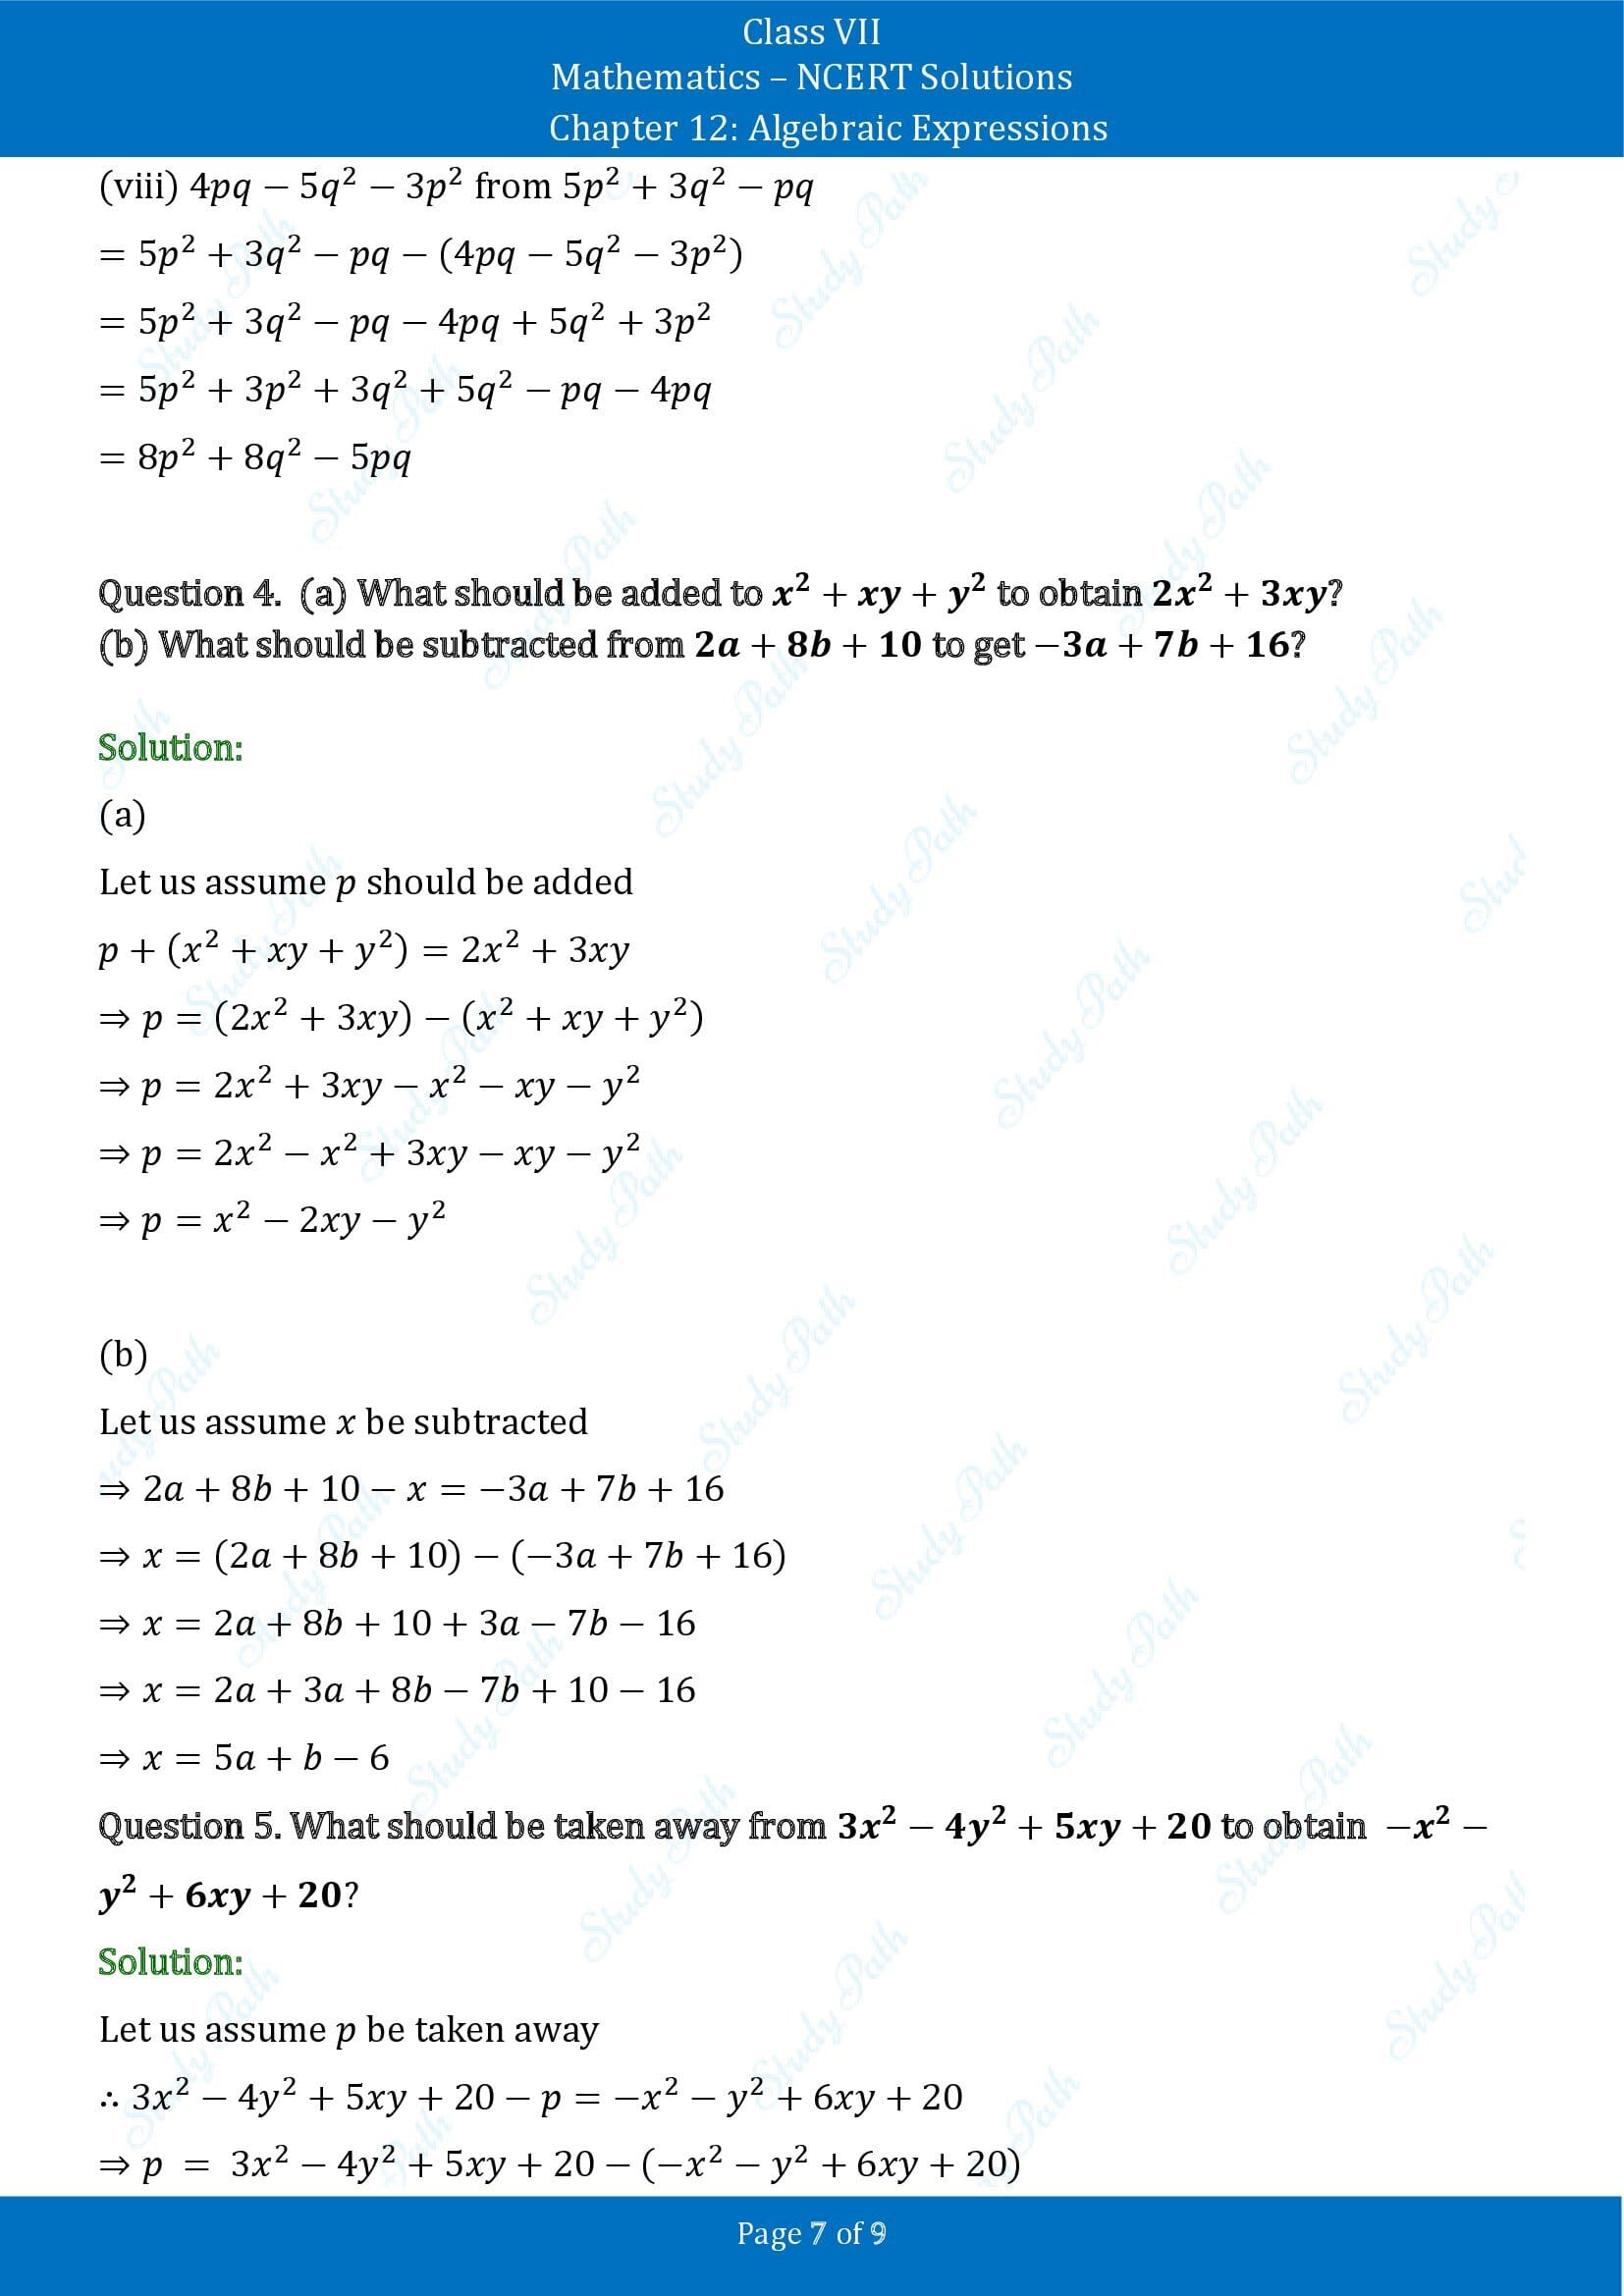 NCERT Solutions for Class 7 Maths Chapter 12 Algebraic Expressions Exercise 12.2 00007